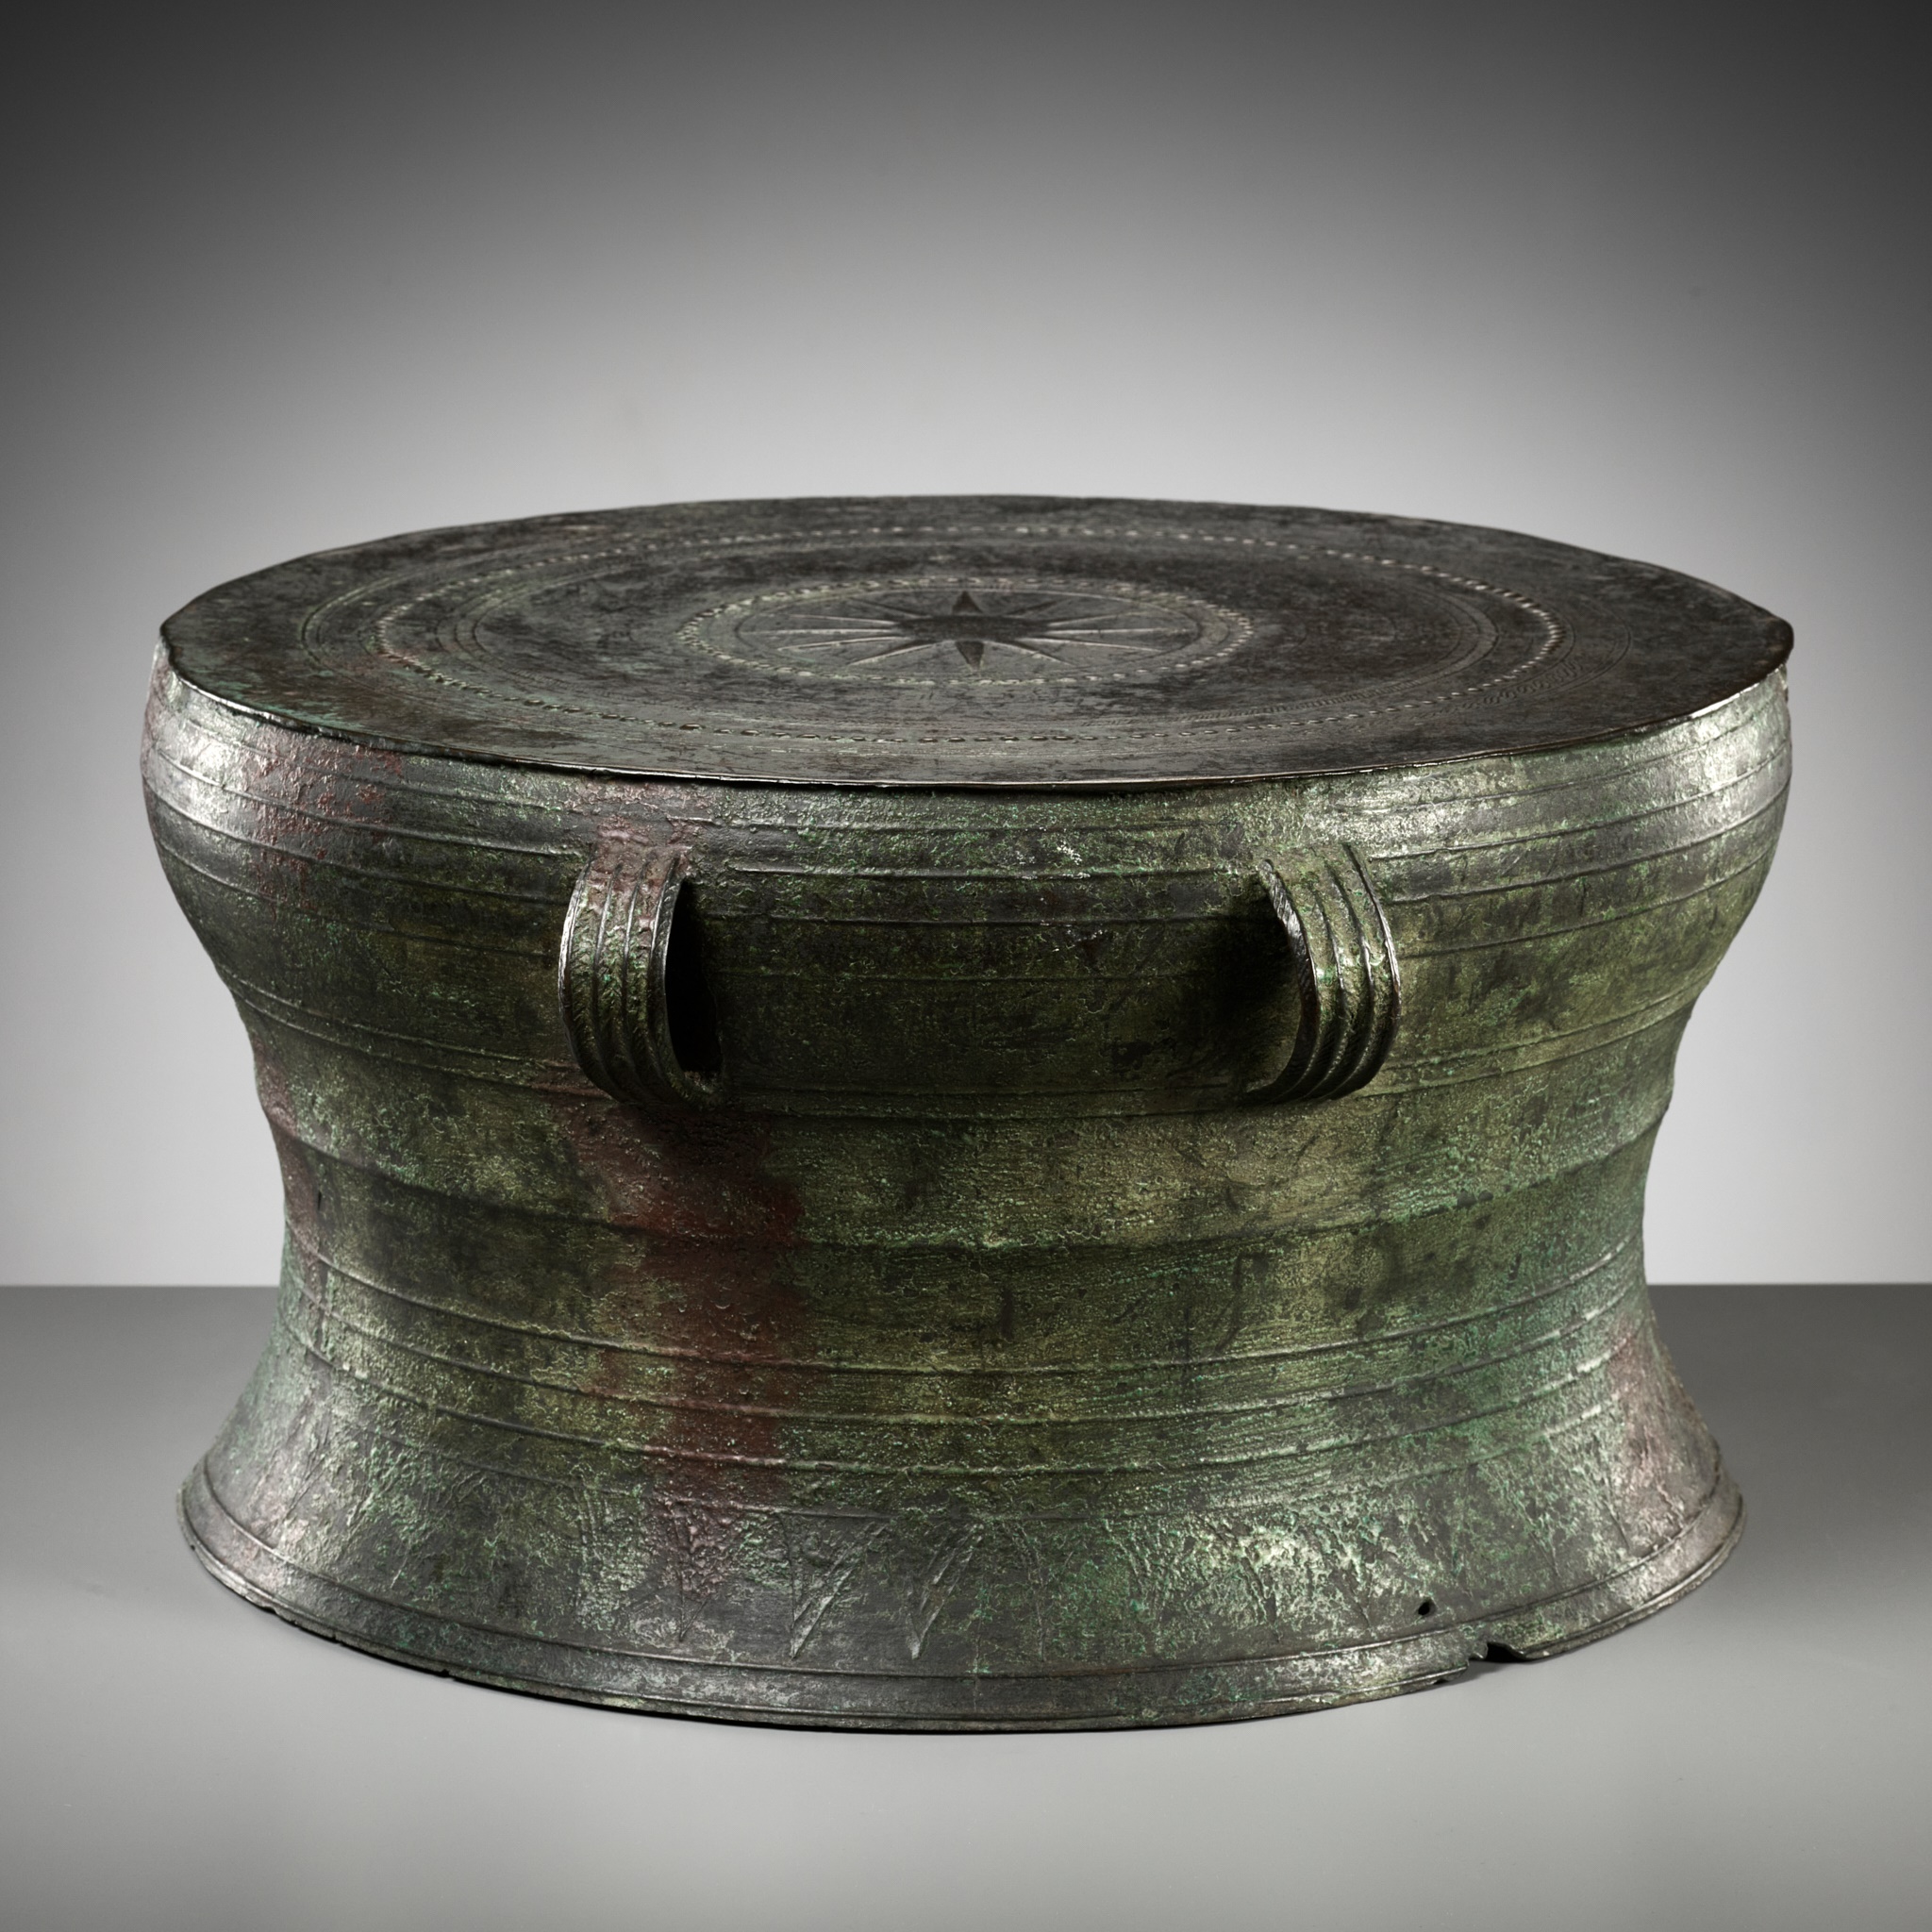 A LARGE AND HEAVY BRONZE RAIN DRUM, DONG SON CULTURE